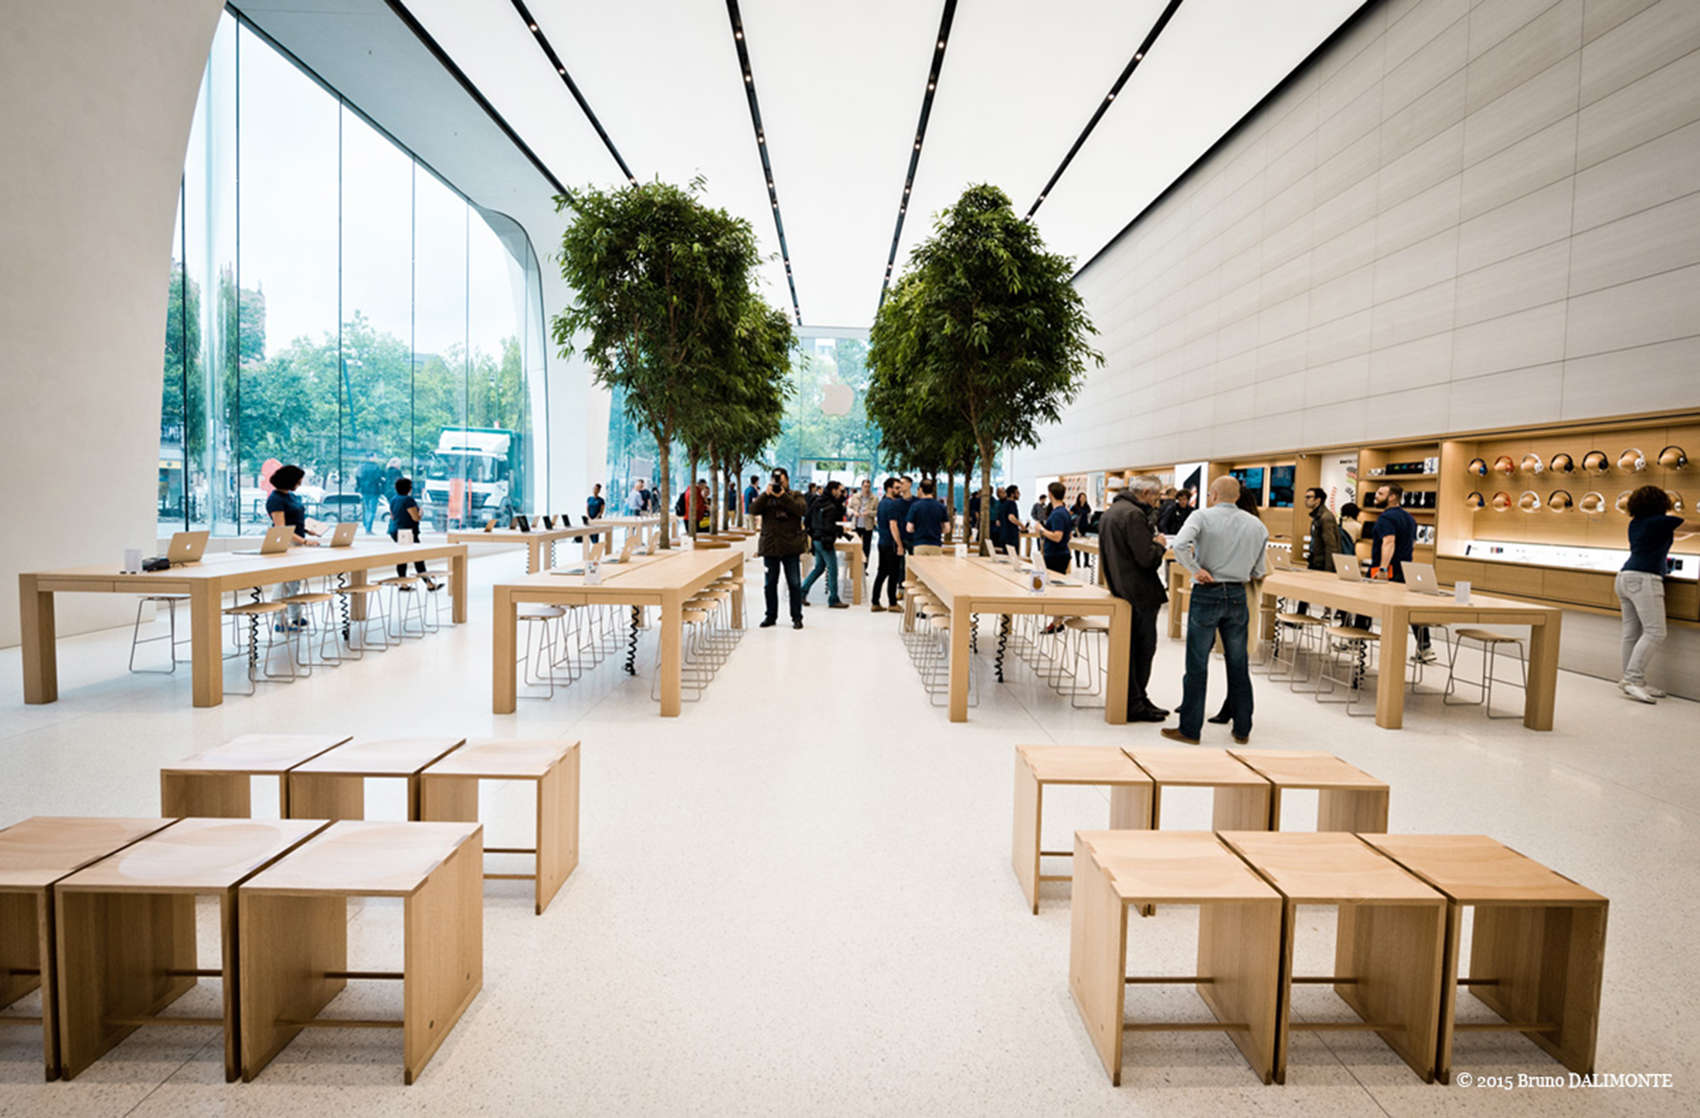 Everyone should be welcome in the Apple Store.